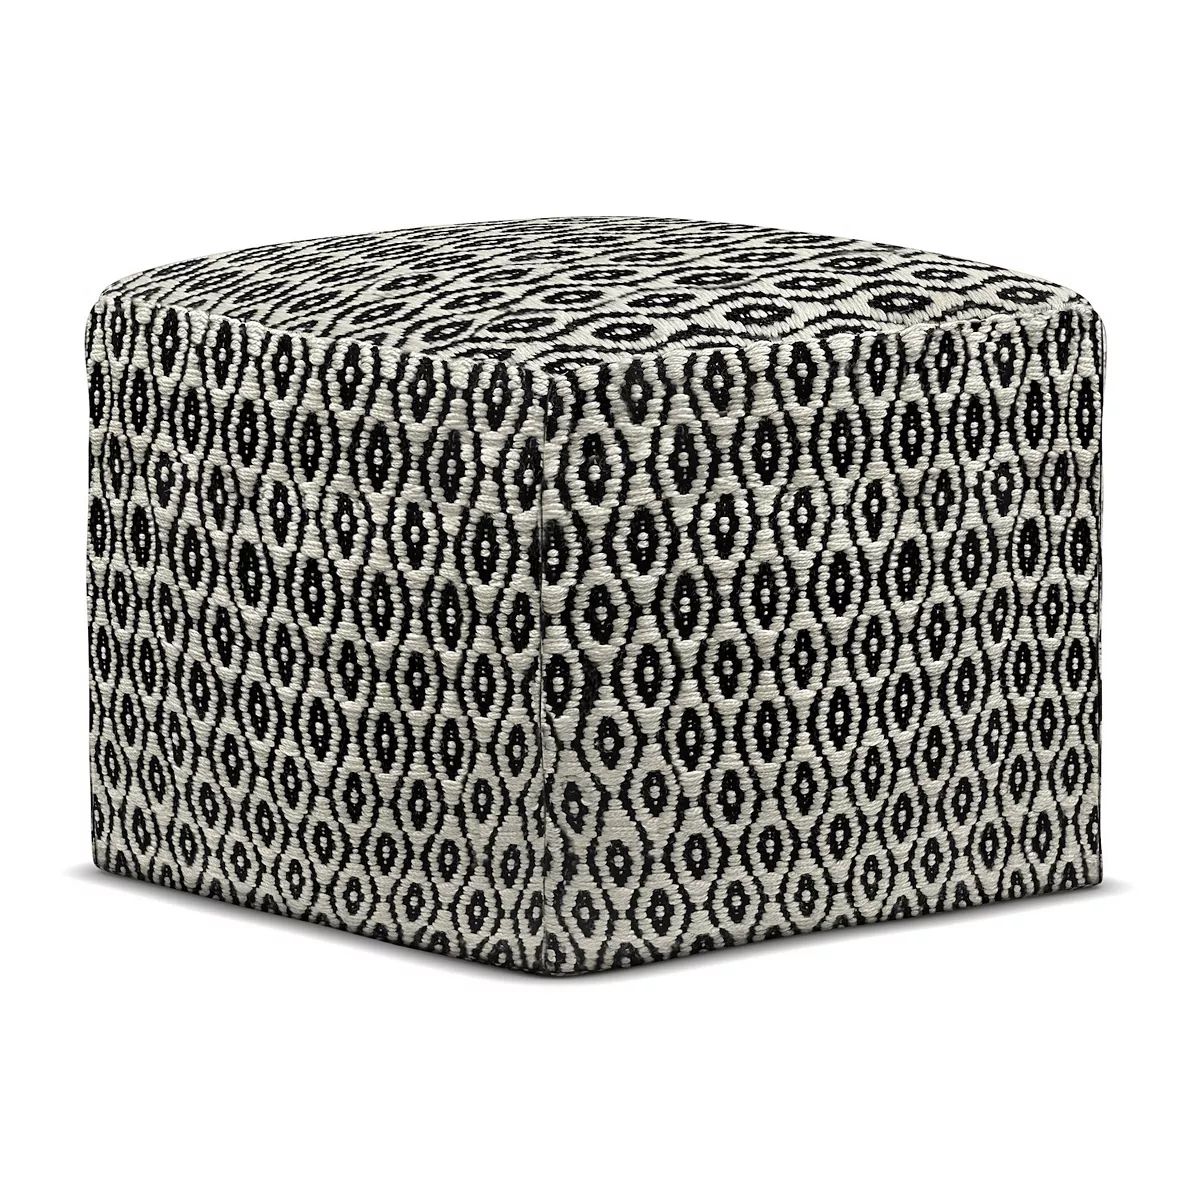 Simpli Home Kiana 18-in. Square Woven Indoor / Outdoor Pouf | Kohl's